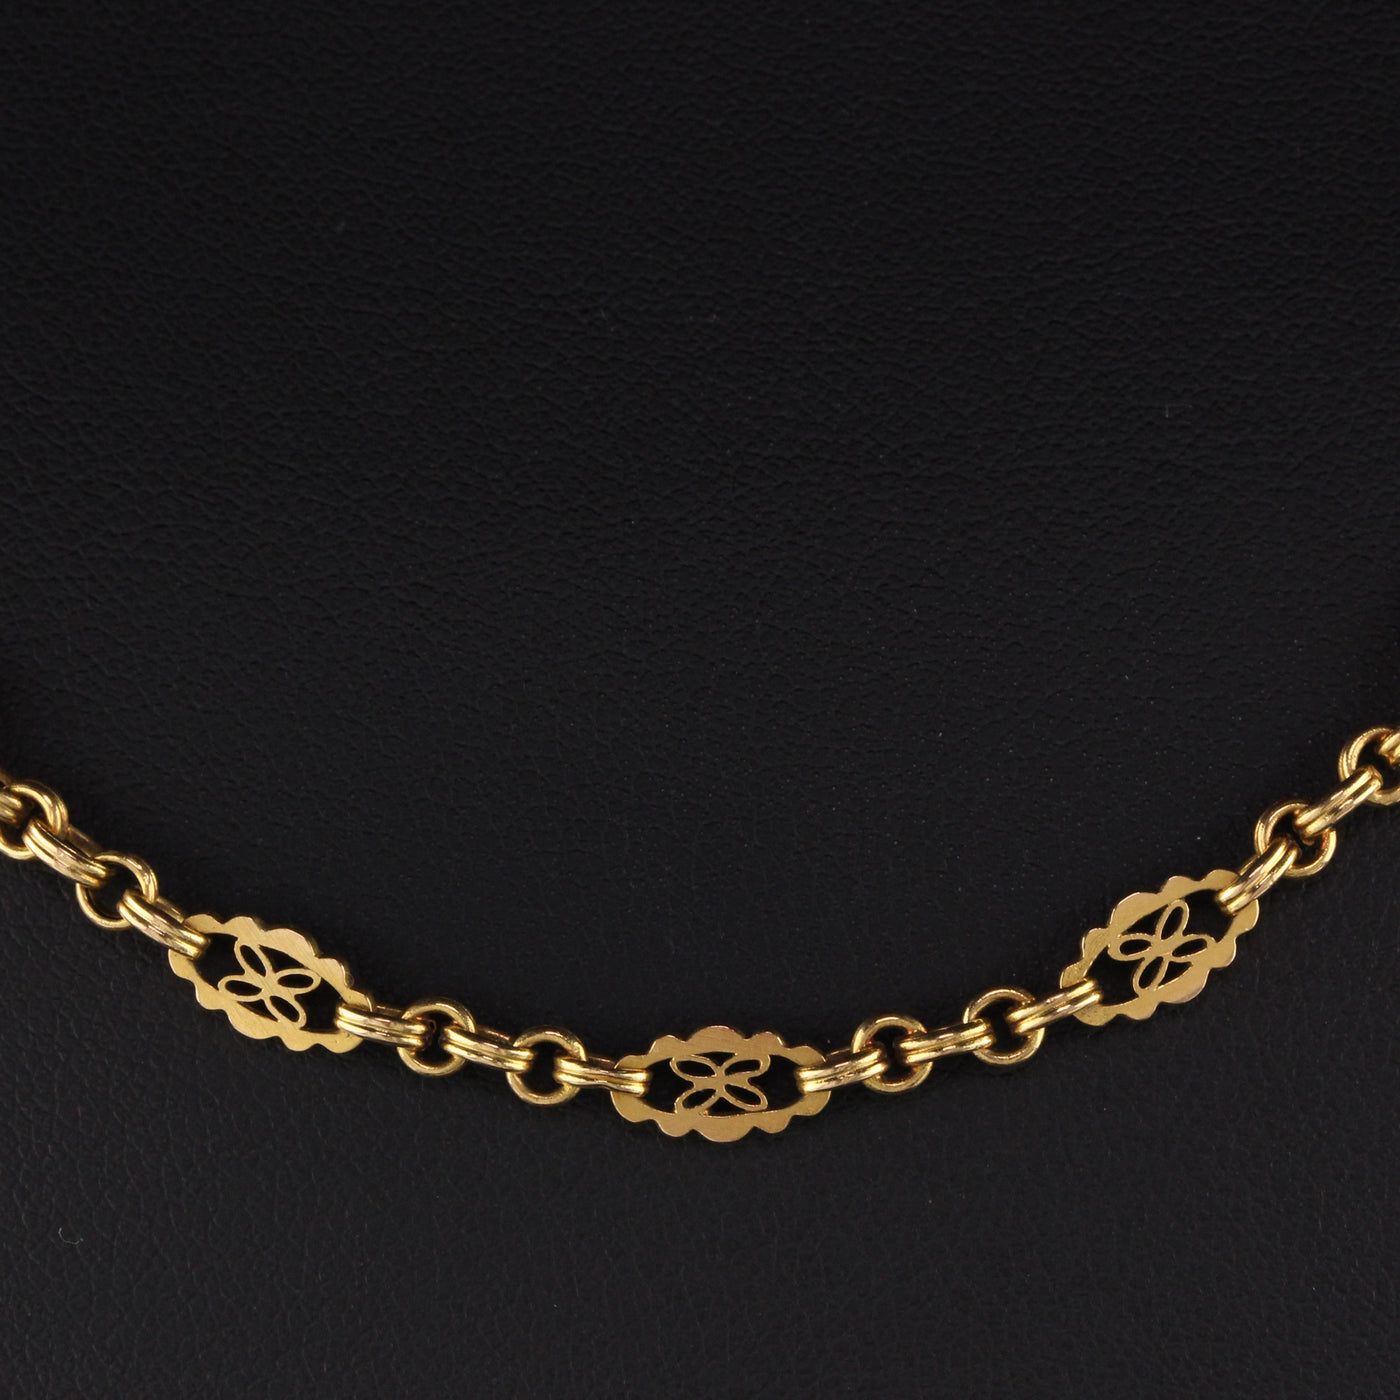 Victorian 20K Yellow Gold Necklace Chain